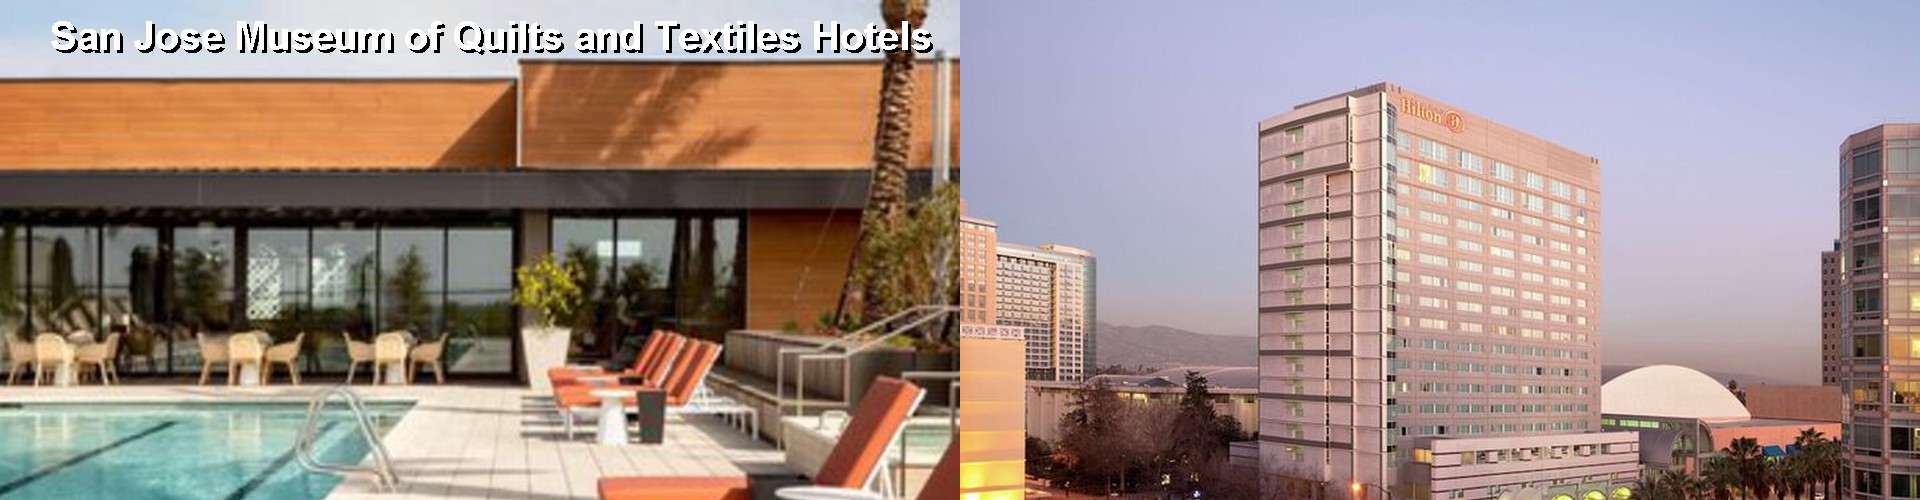 4 Best Hotels near San Jose Museum of Quilts and Textiles